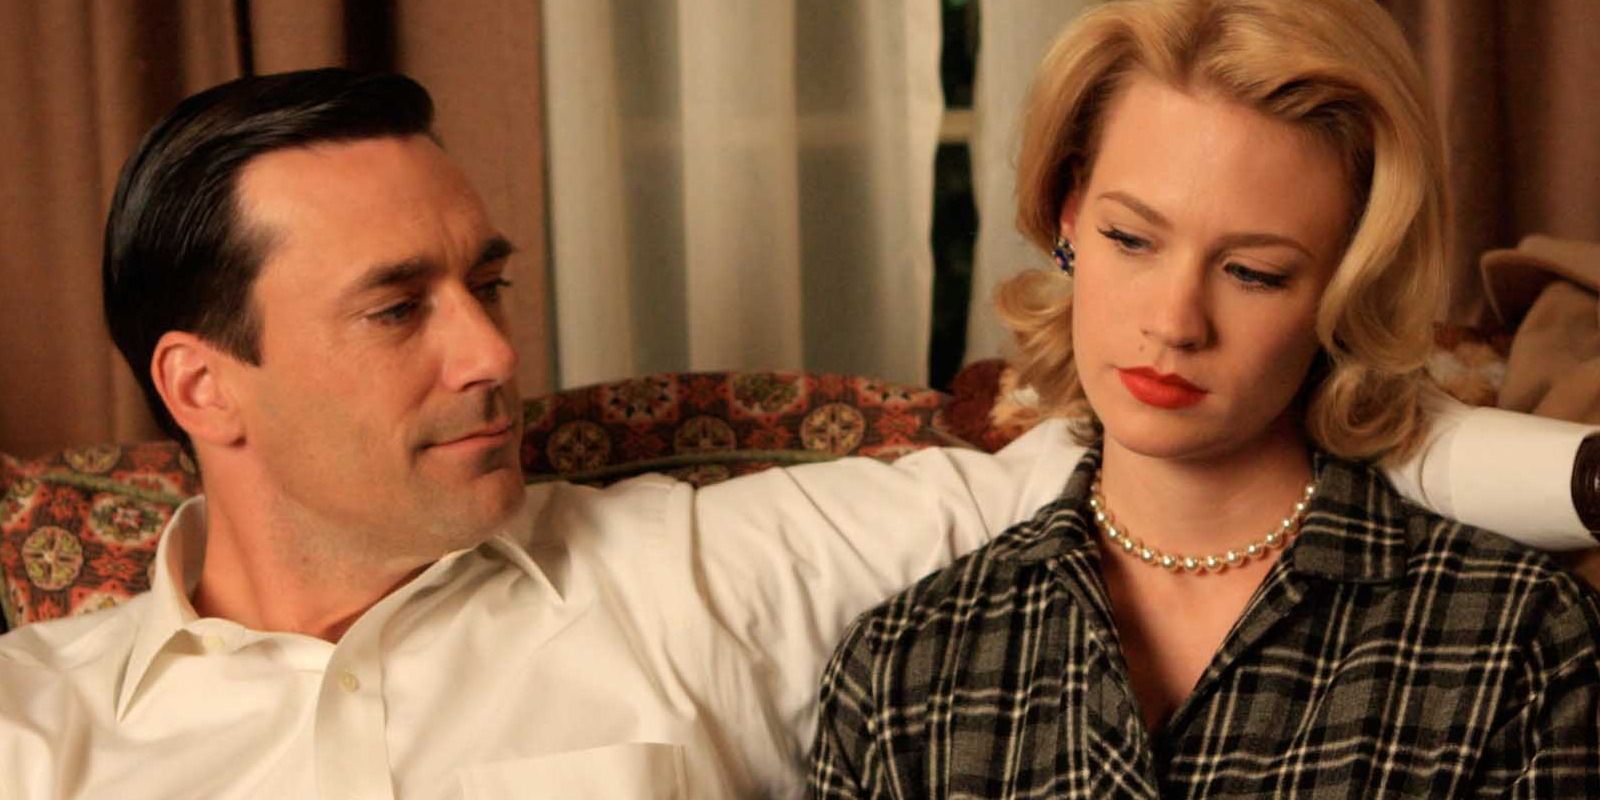 Don Draper puts his arm around Betty in an episode of Mad Men